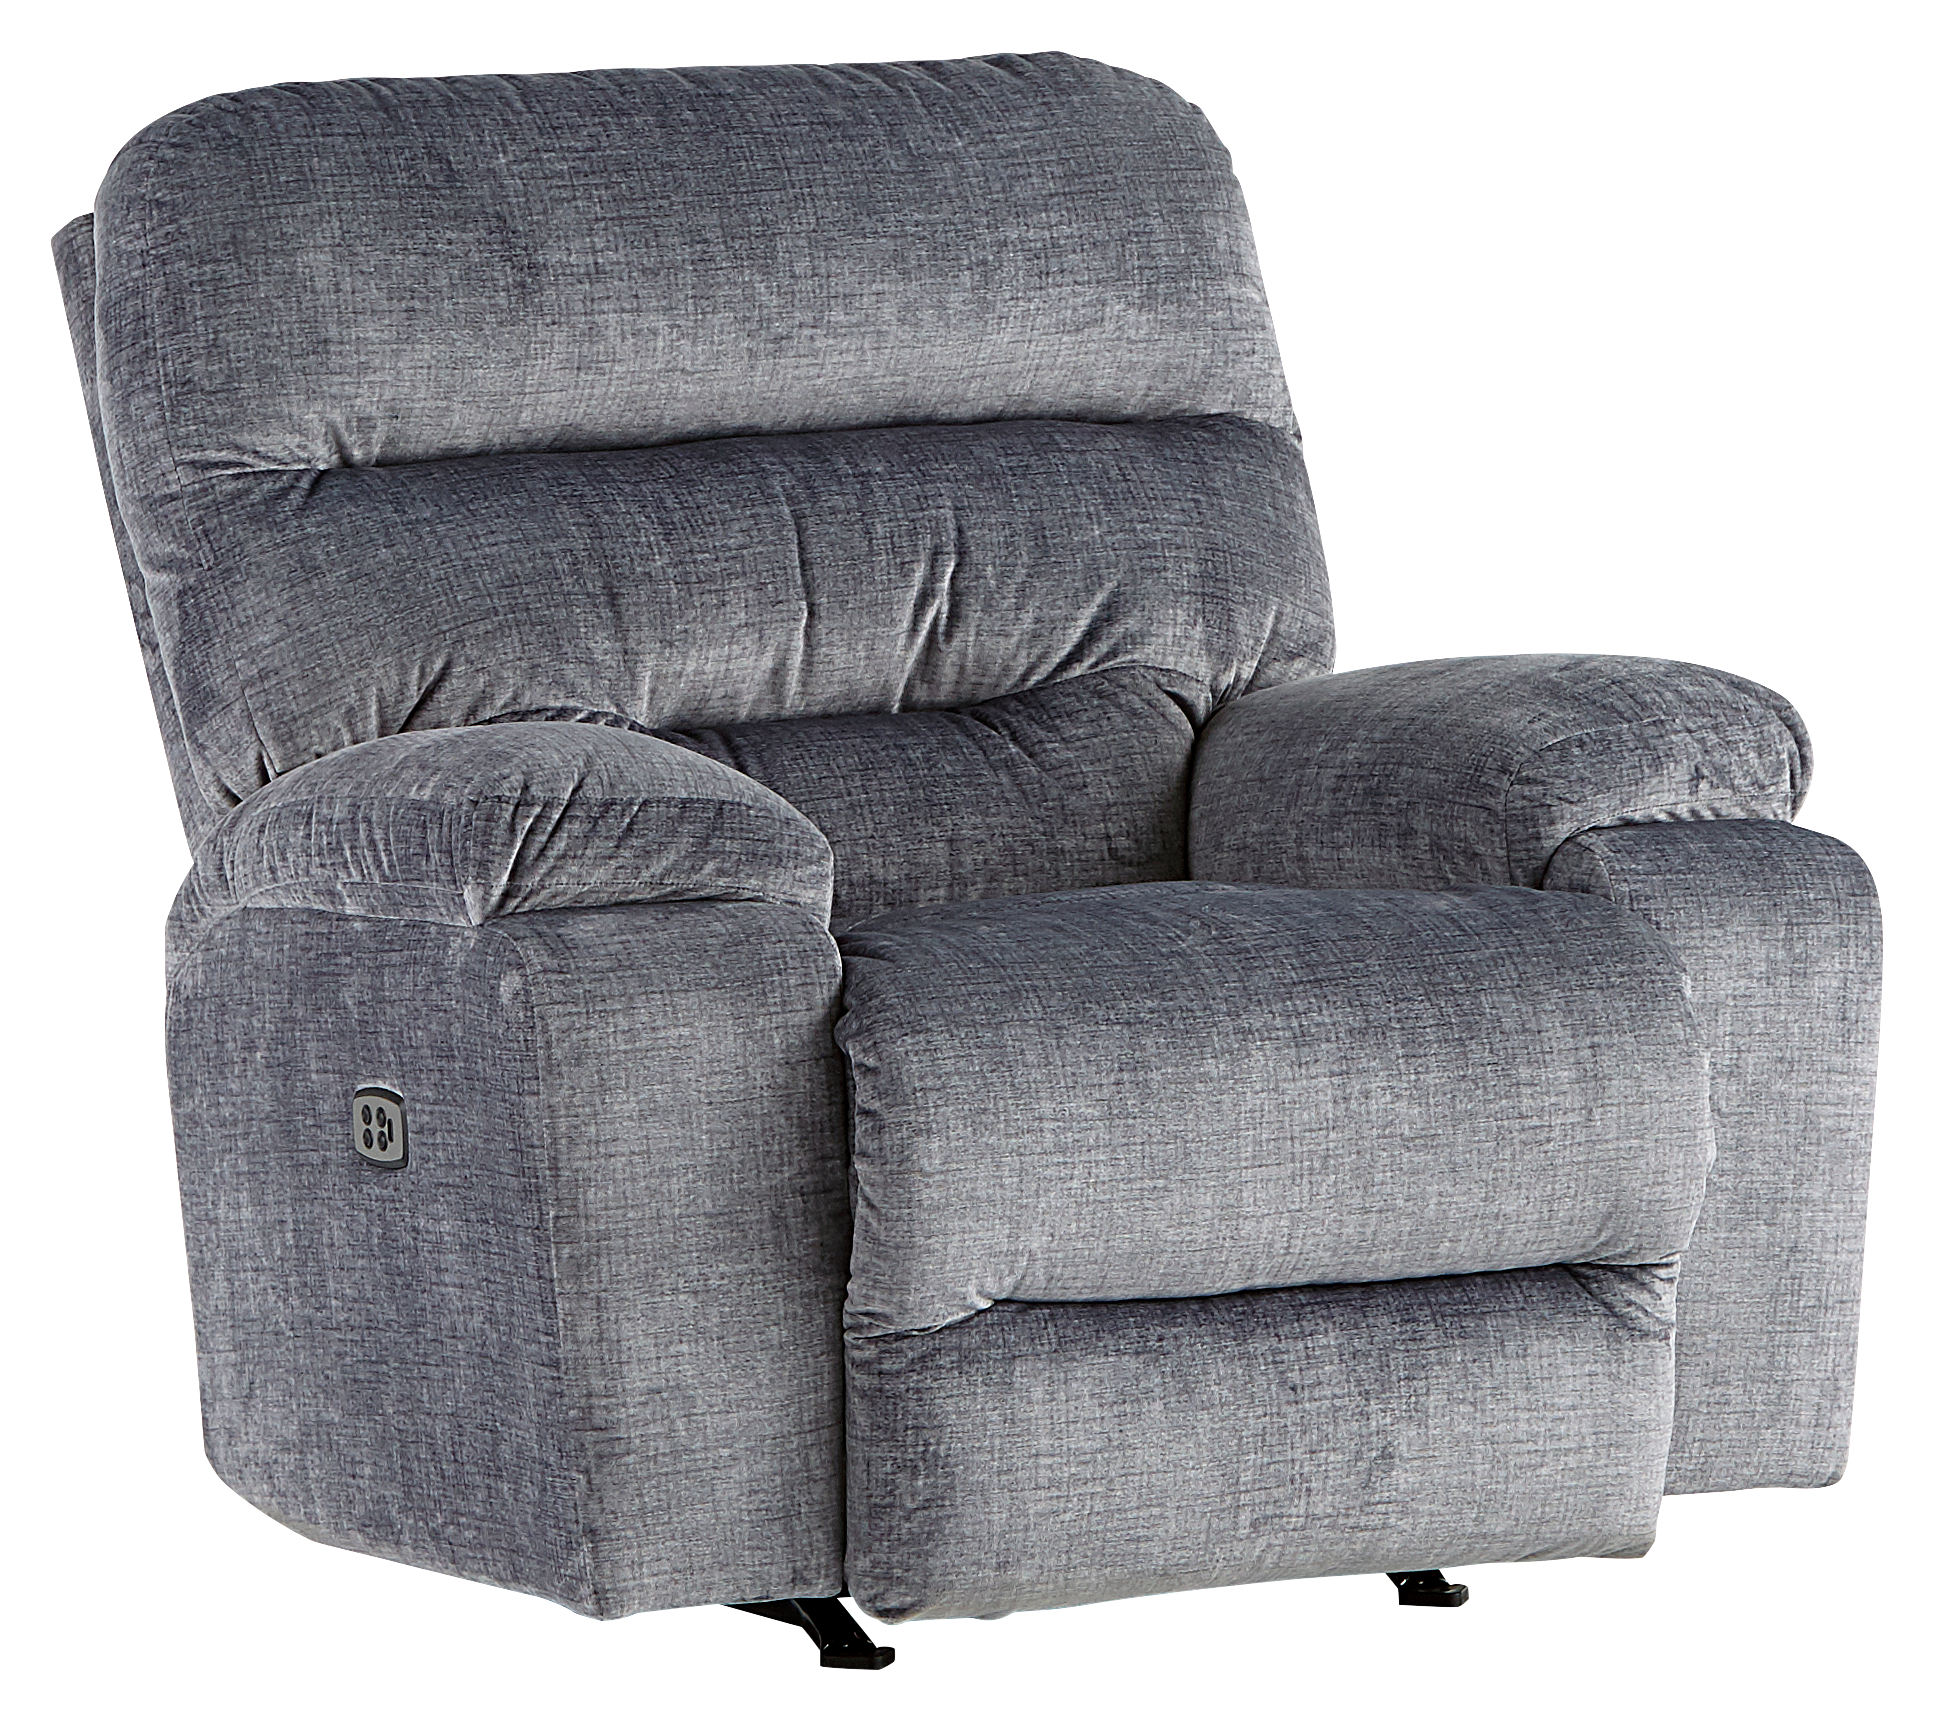 Best Home Furnishings Ryson Casual Power Rocker Recliner with Power Headrest and USB Port